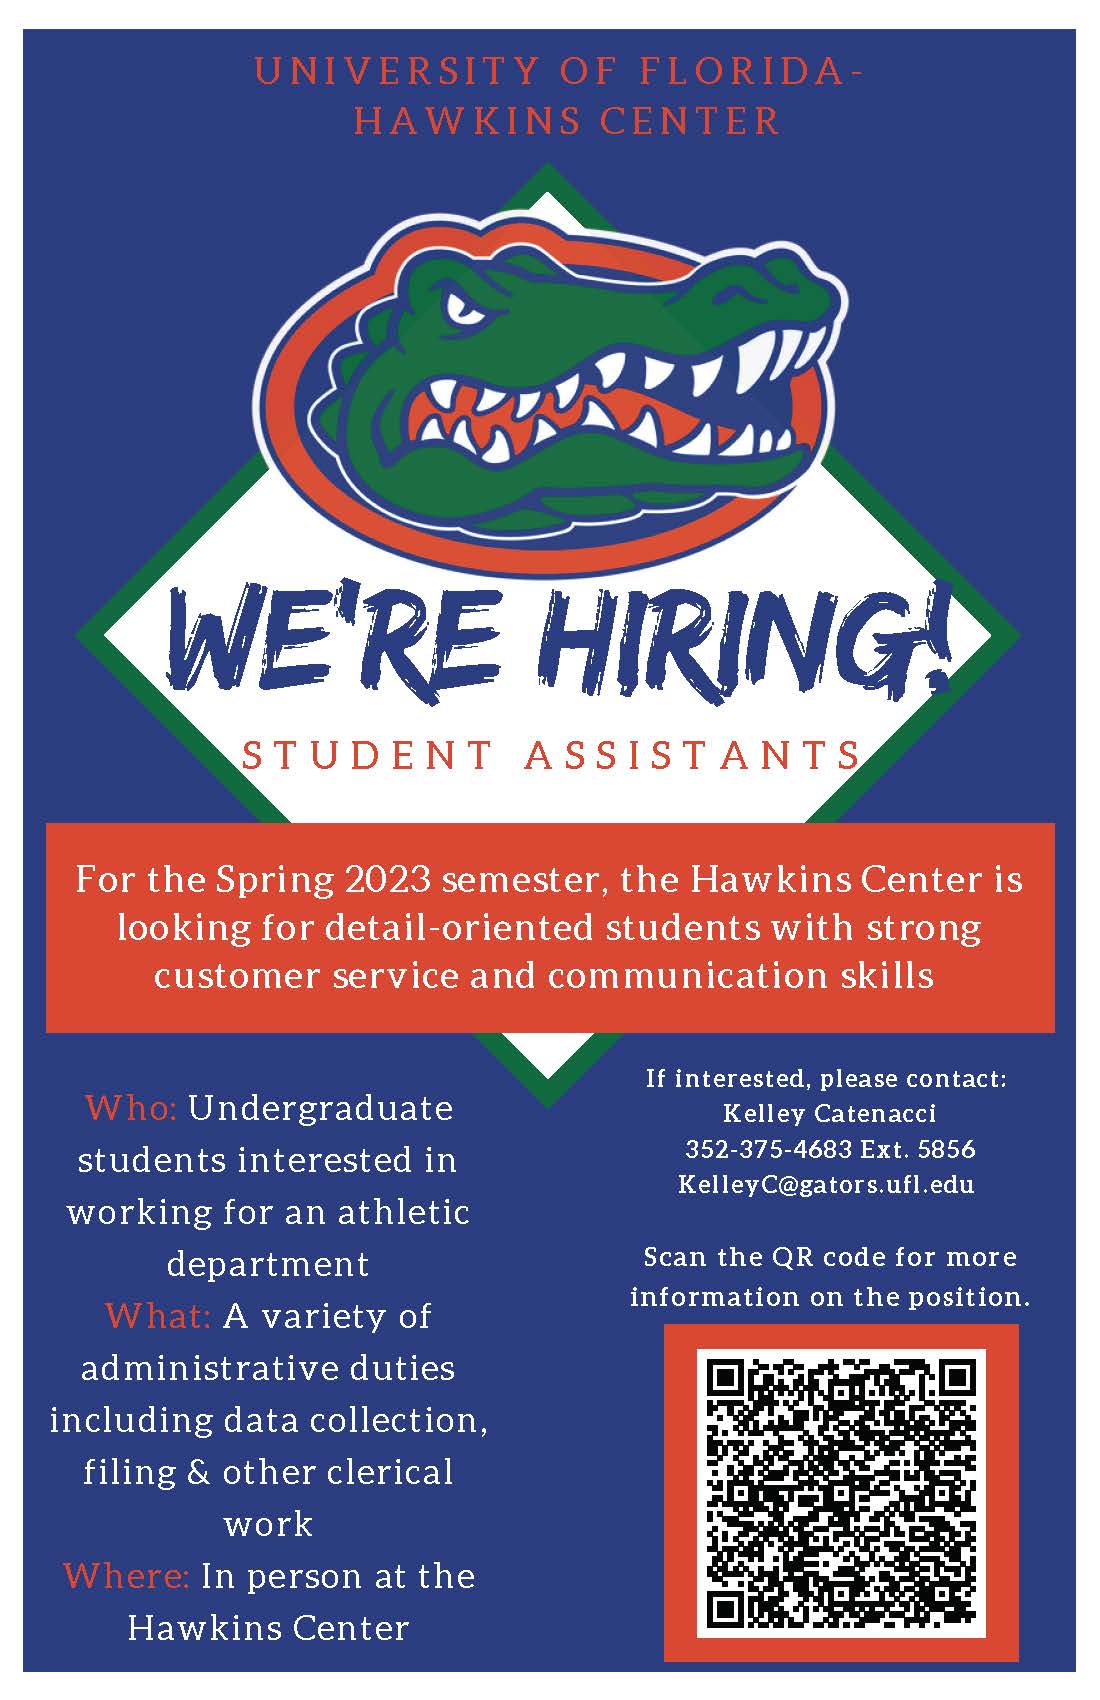 A flyer for student assistant positions with a QR code on the bottom right corner for more information about the position.